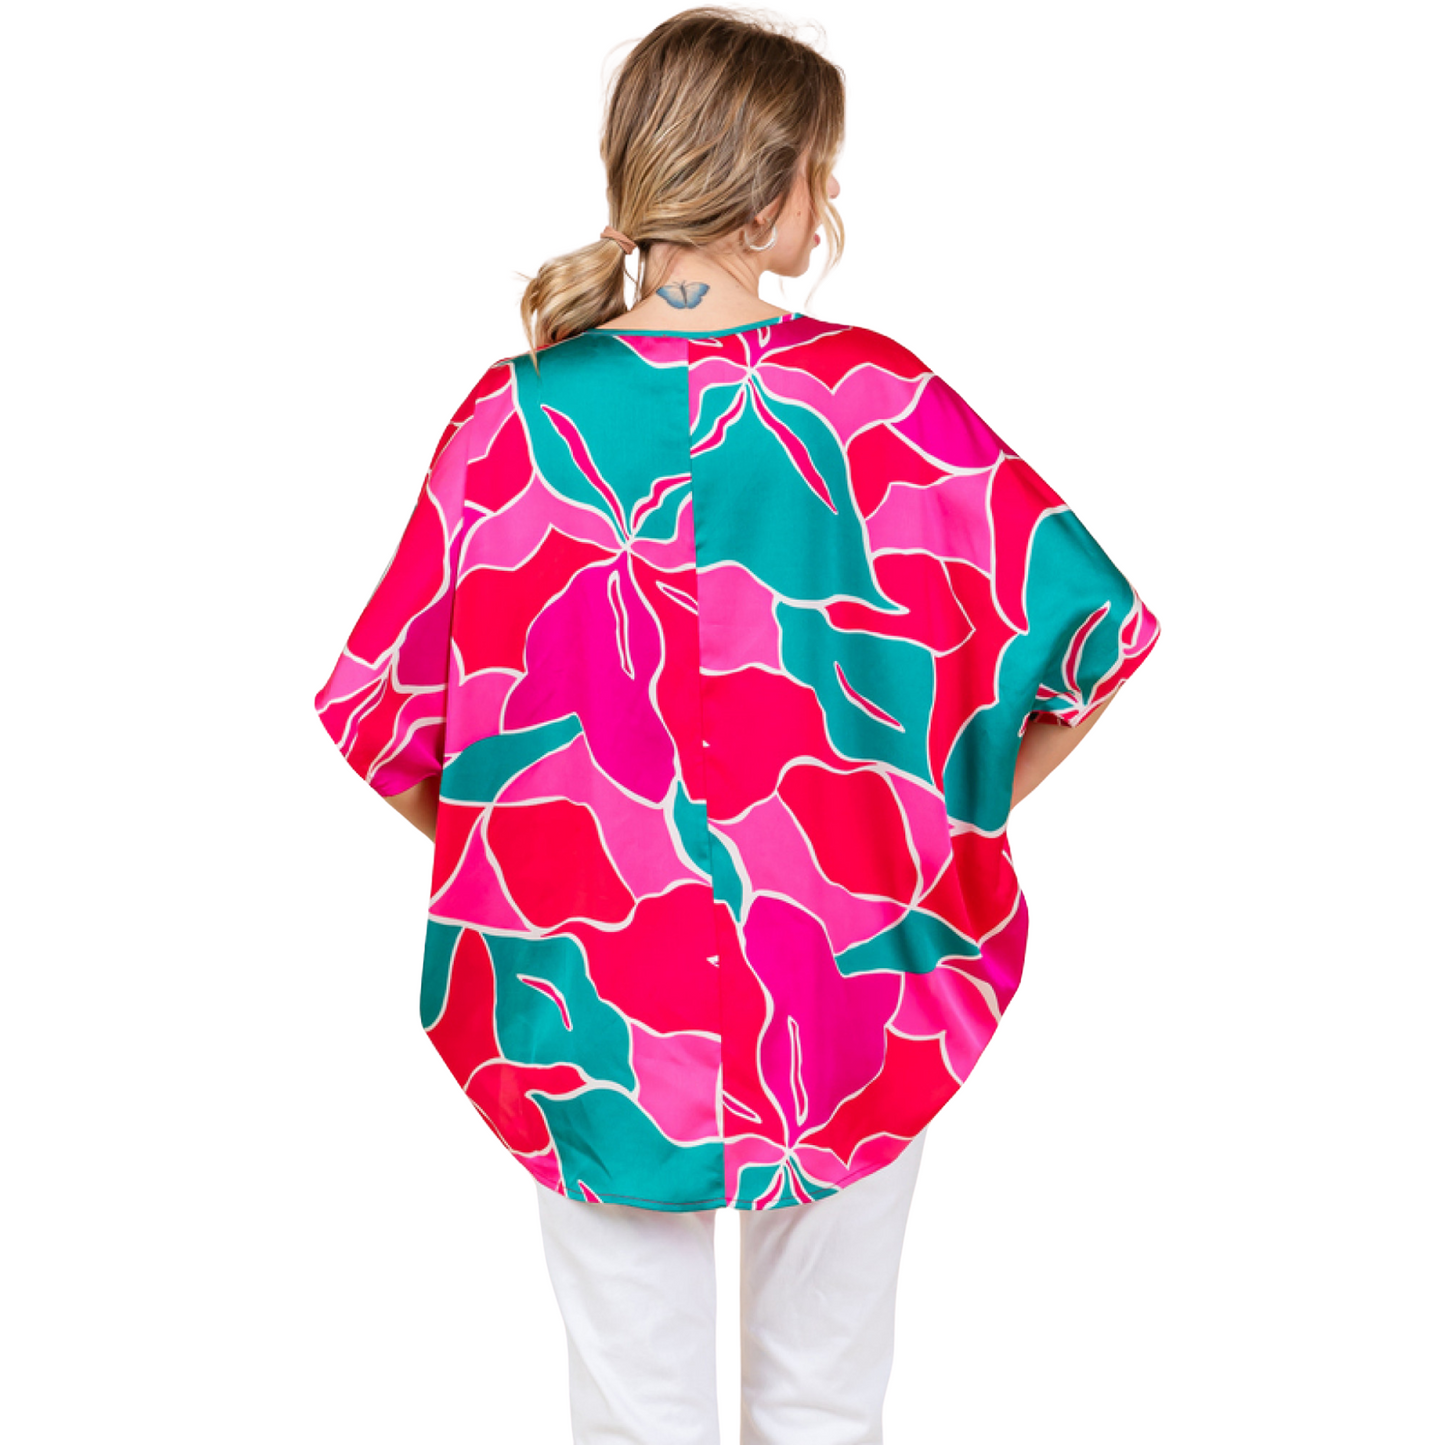 Expertly designed with a vibrant multicolor print, this Short Sleeve Abstract Top is a must-have for any fashion-forward wardrobe. The wide V-neck and short sleeves offer a stylish and comfortable fit, while the pink and turquoise mix adds a playful touch. Perfect for any occasion, this top is sure to make a statement.